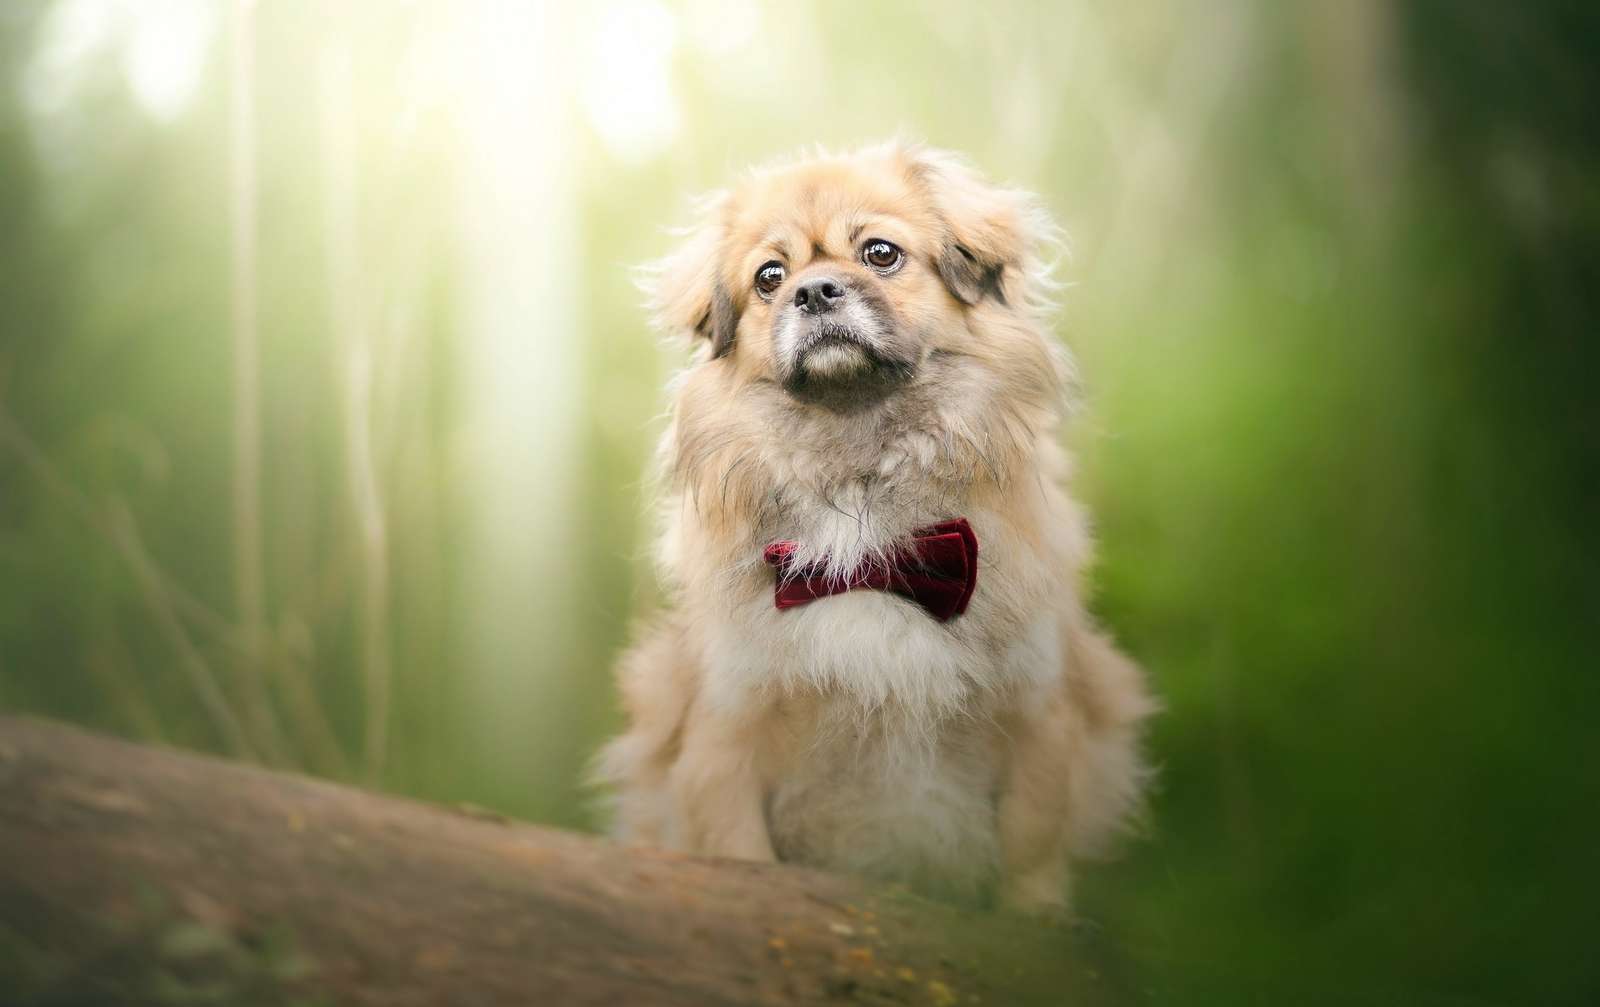 Pekingese with a red bow tie instead of a collar online puzzle